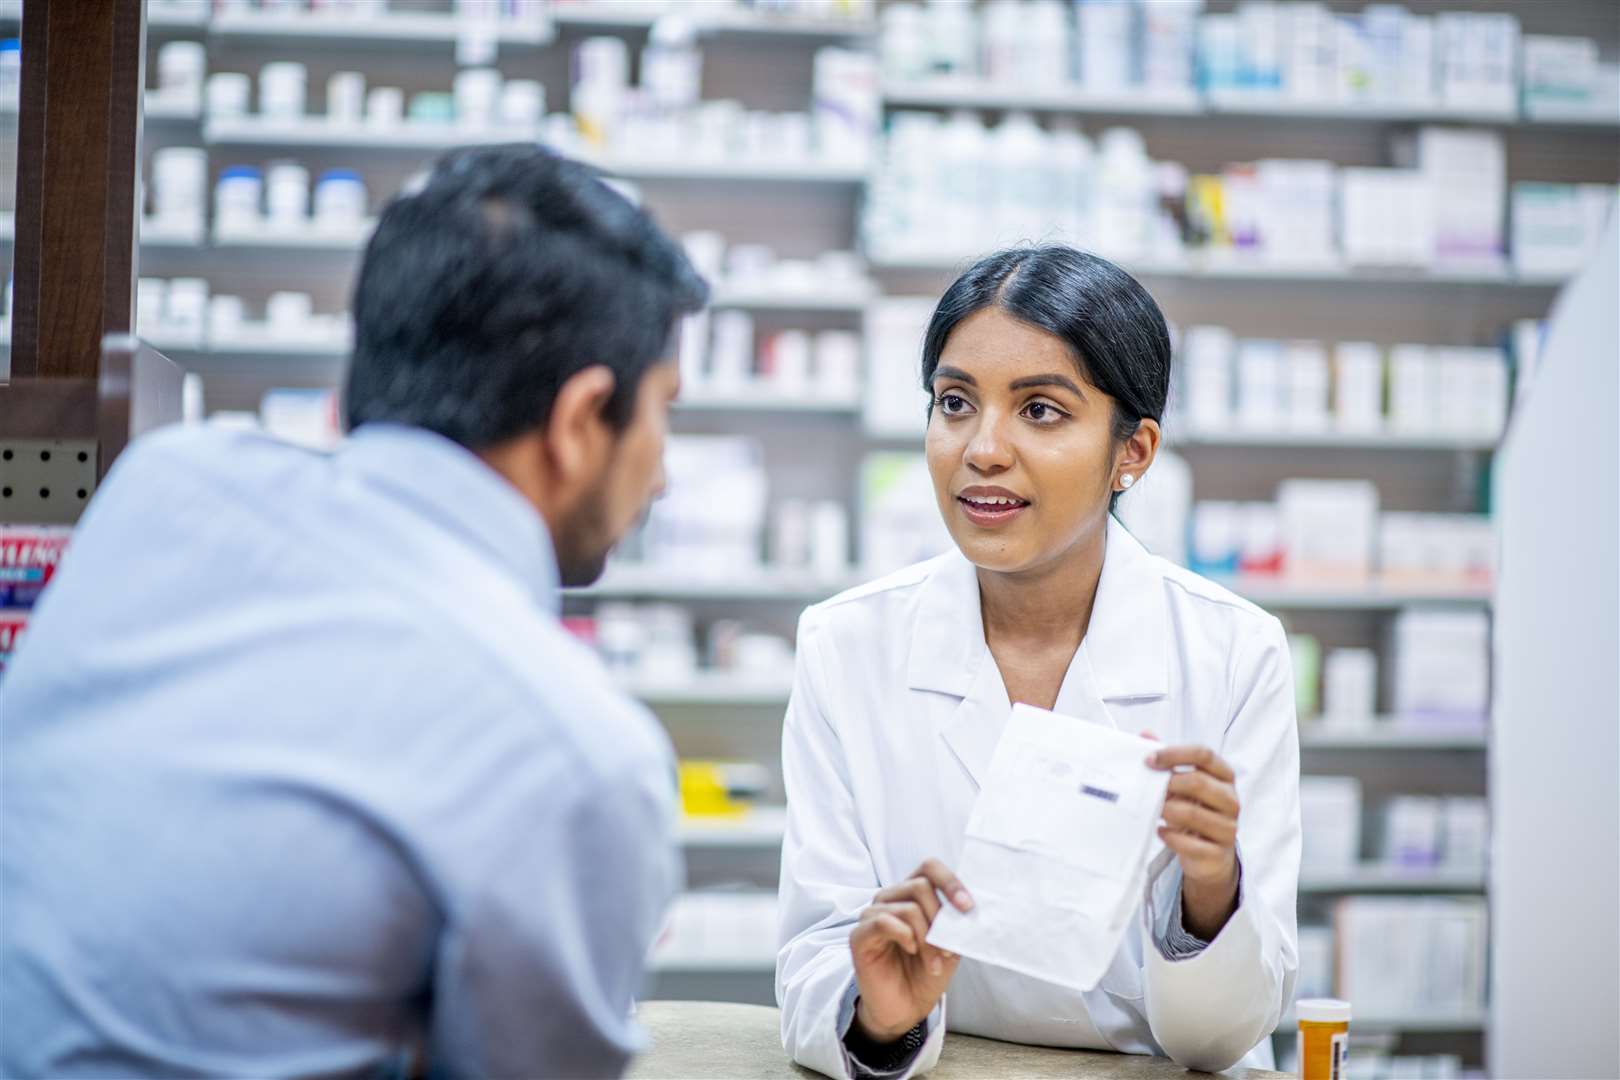 Amish Patel warned rising costs and work force issues could lead to the closure of many local pharmacies. Picture: istock